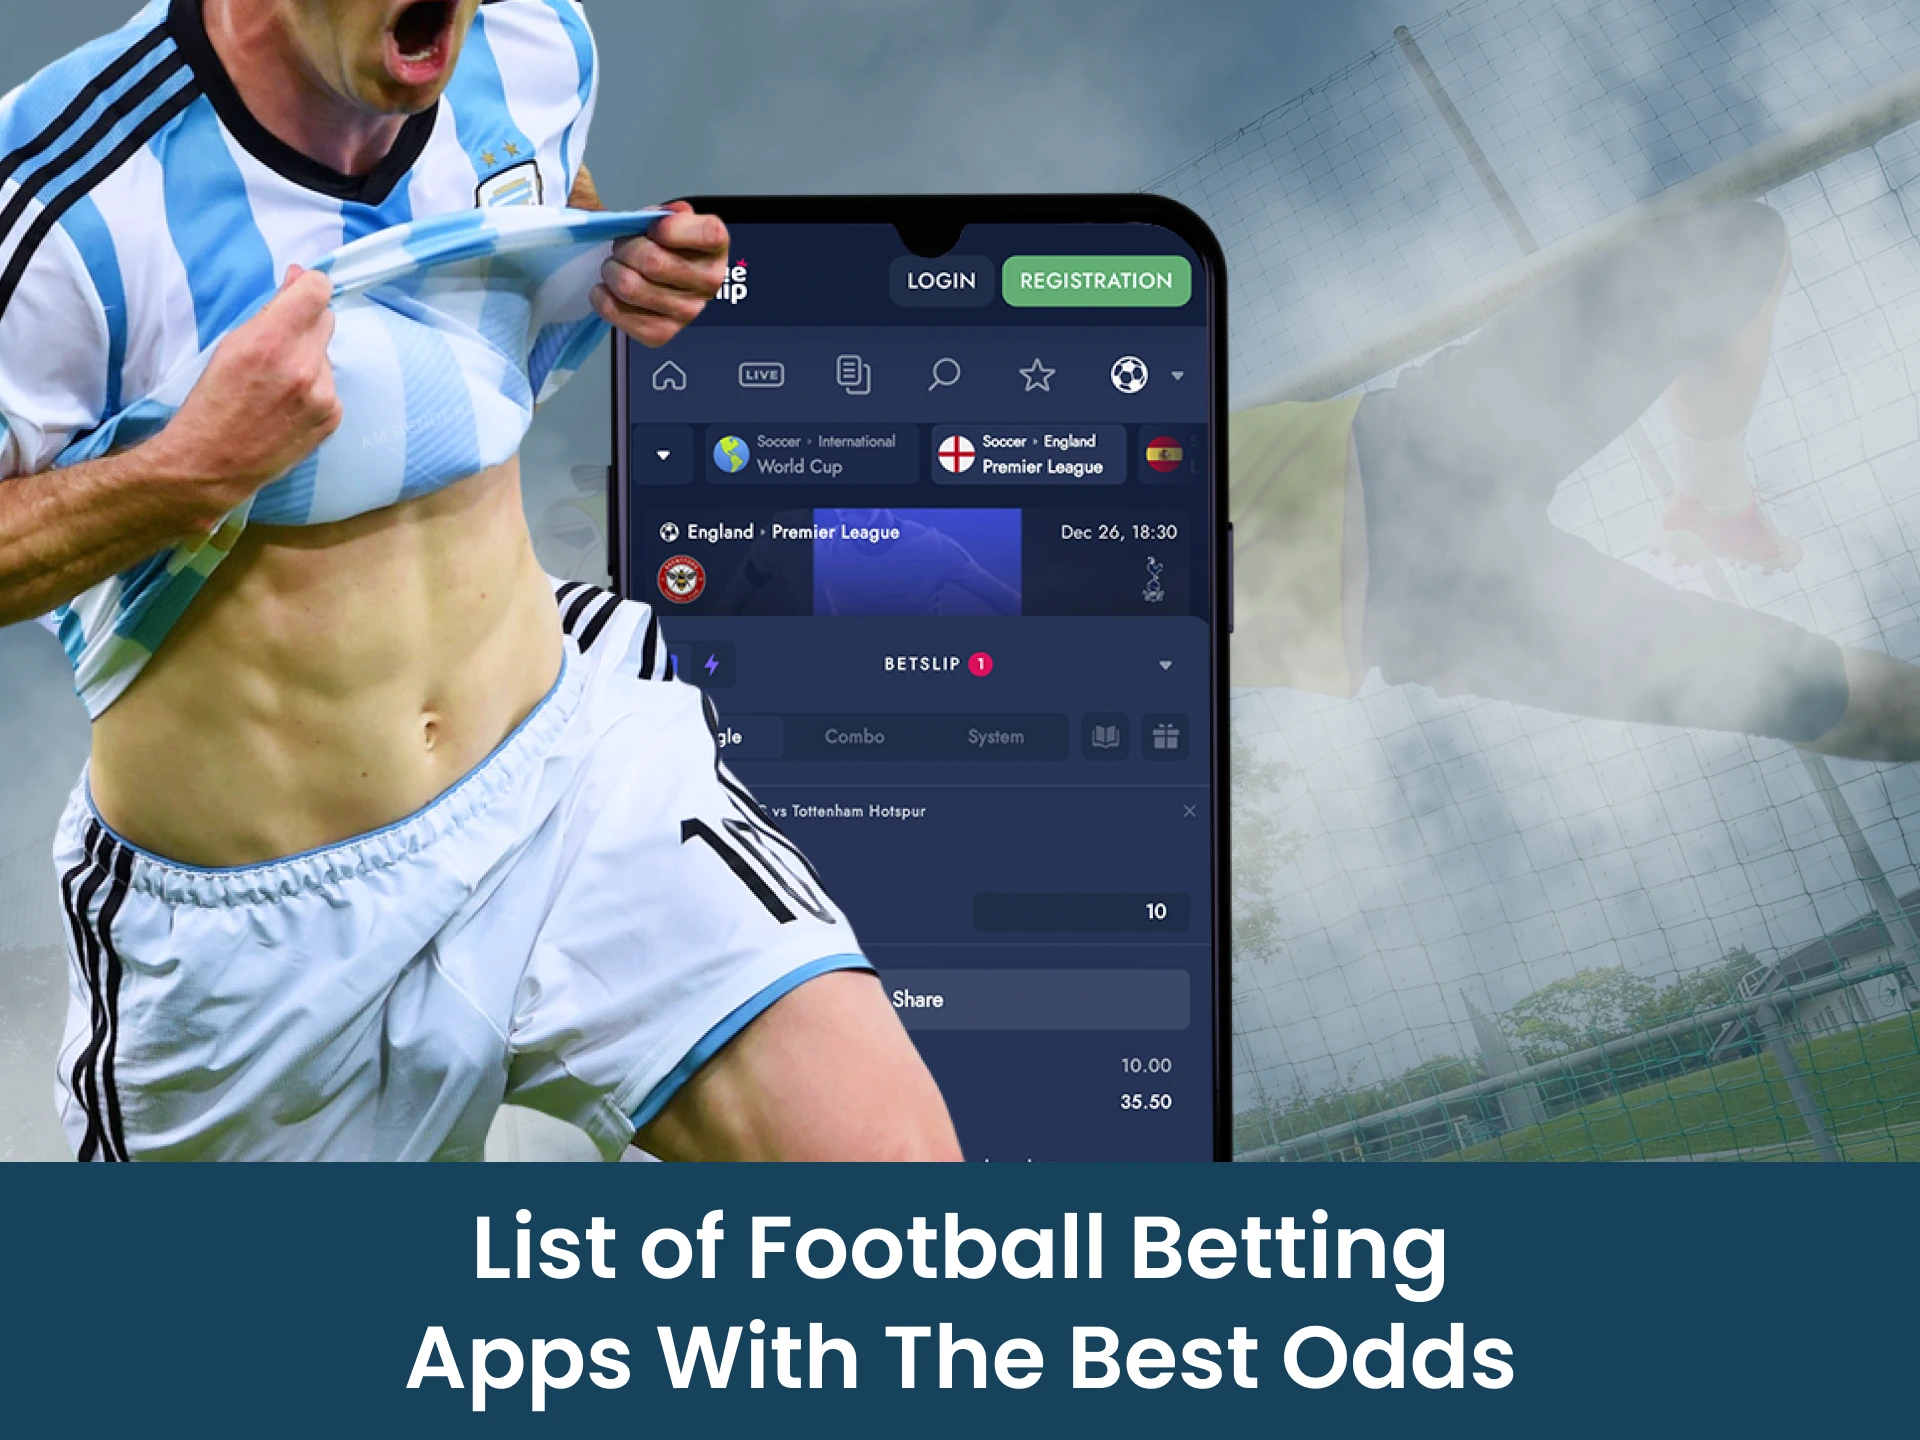 You will find the best betting odds on football on these websites.